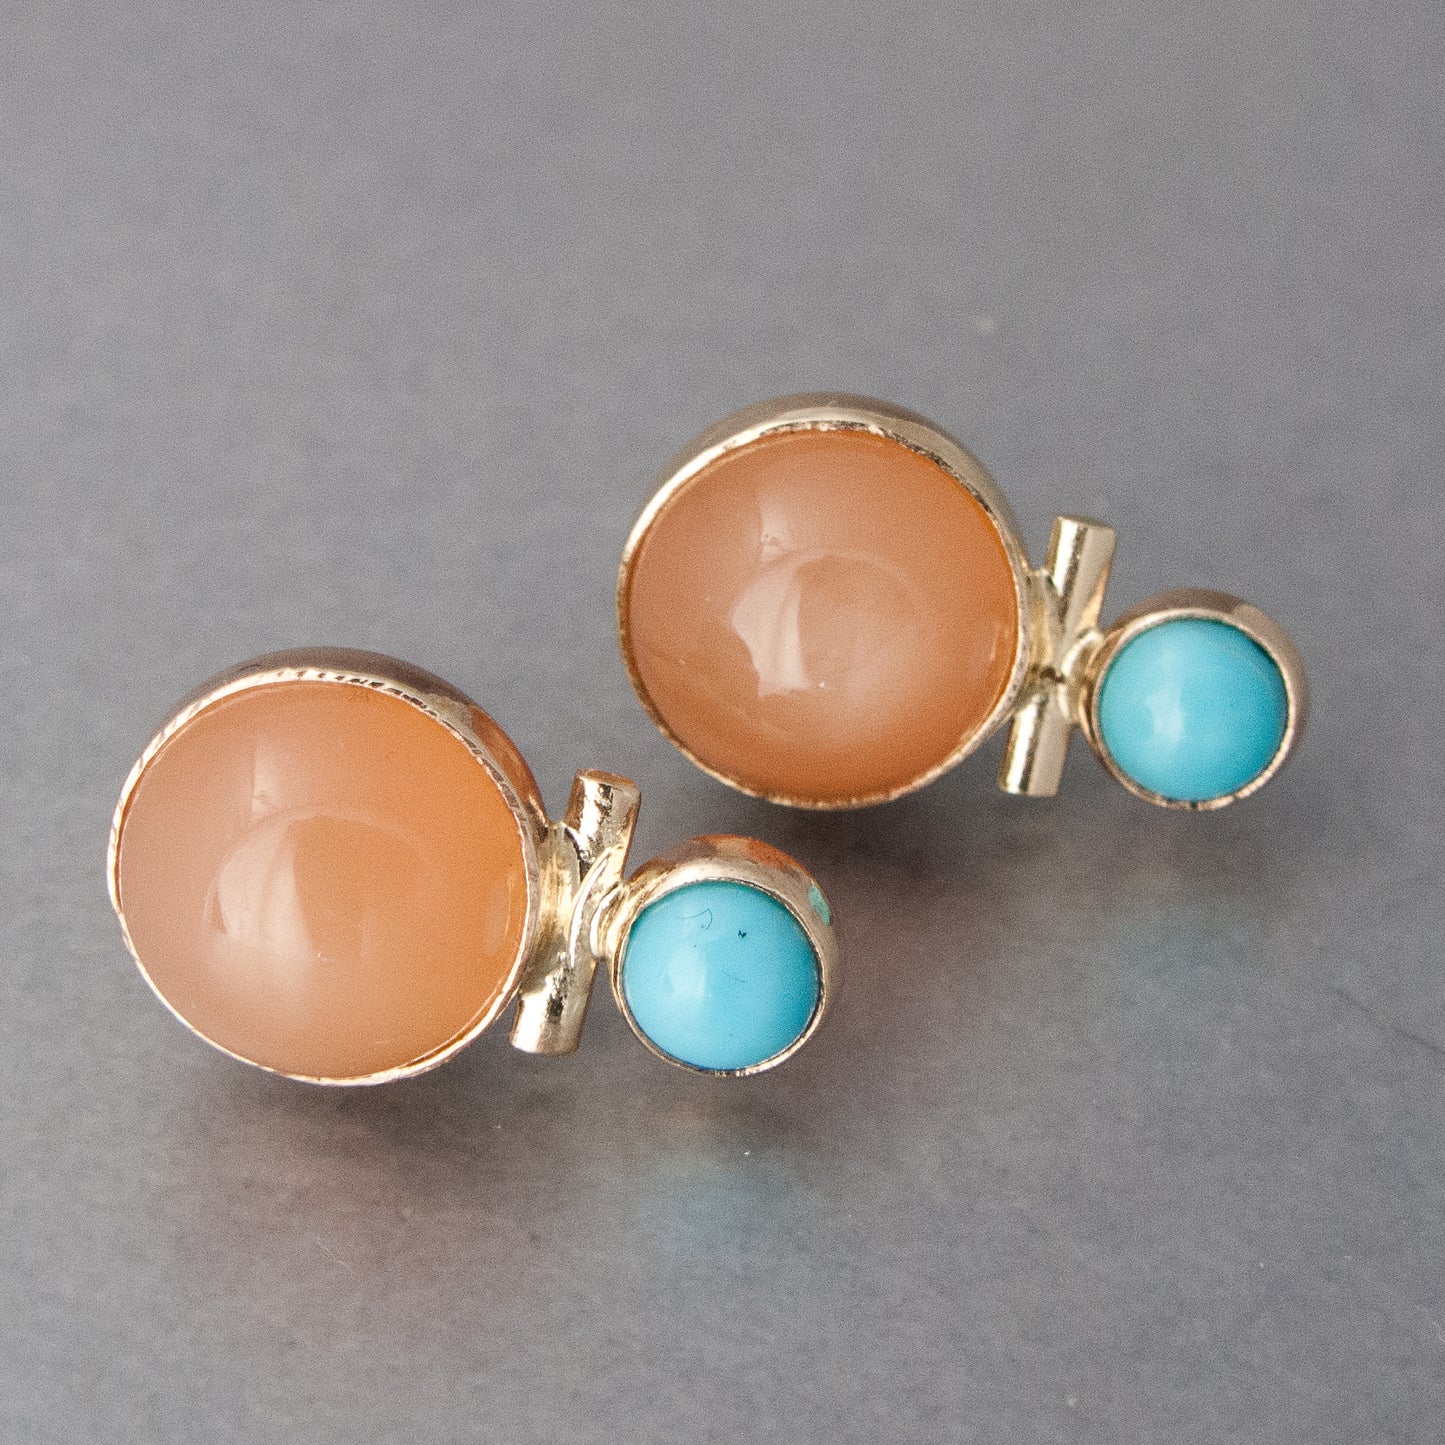 Peach Moonstone and Turquoise Stud Earrings in 14k Yellow Gold Bezels